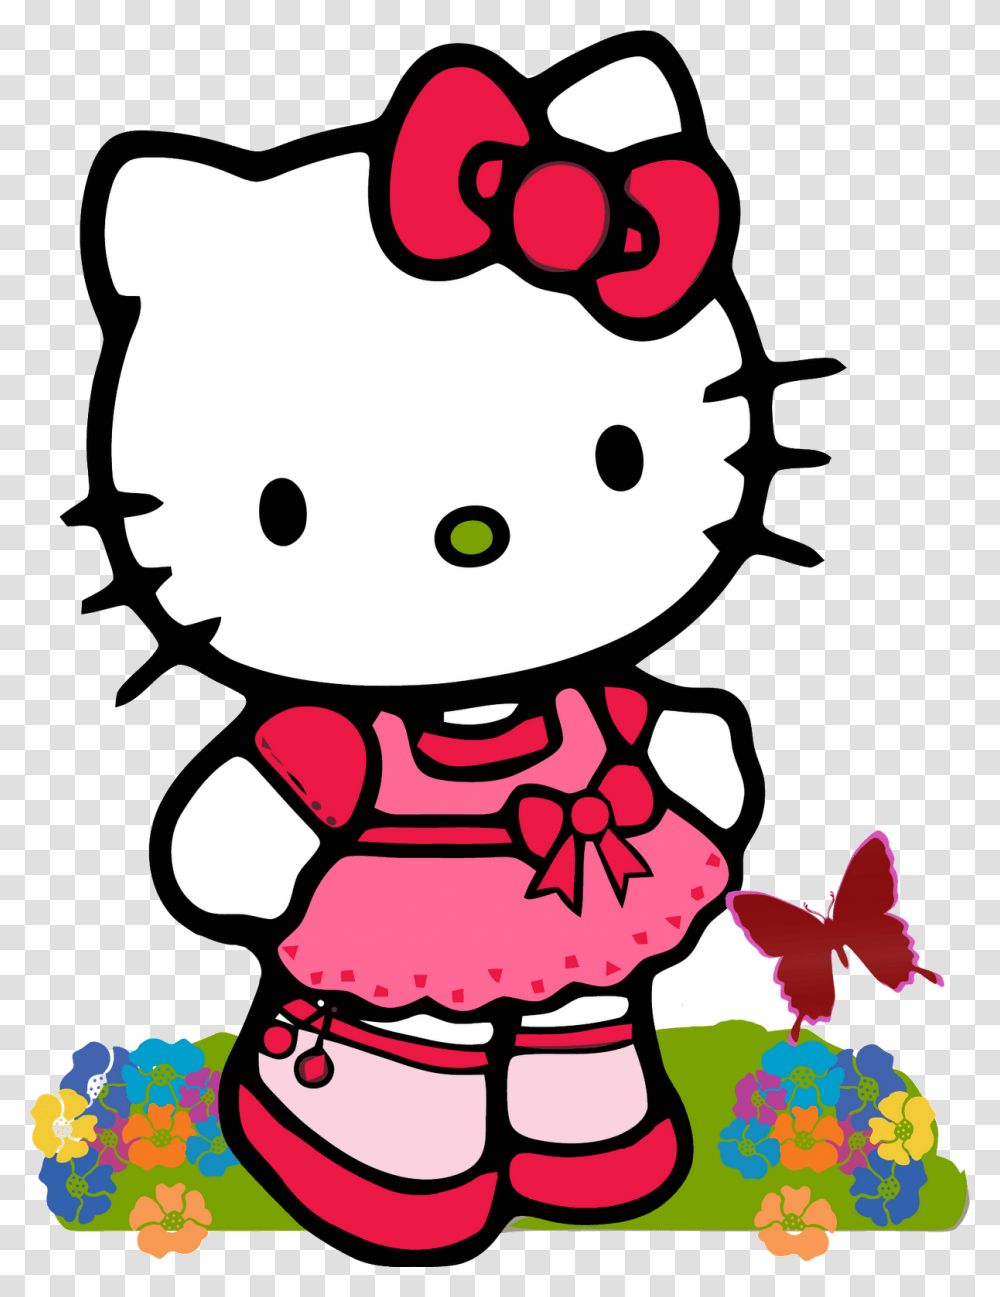 Hello Kitty Free Clip Art On Clipart Cartoon Character Hello Kitty, Toy, Plush, Doll Transparent Png